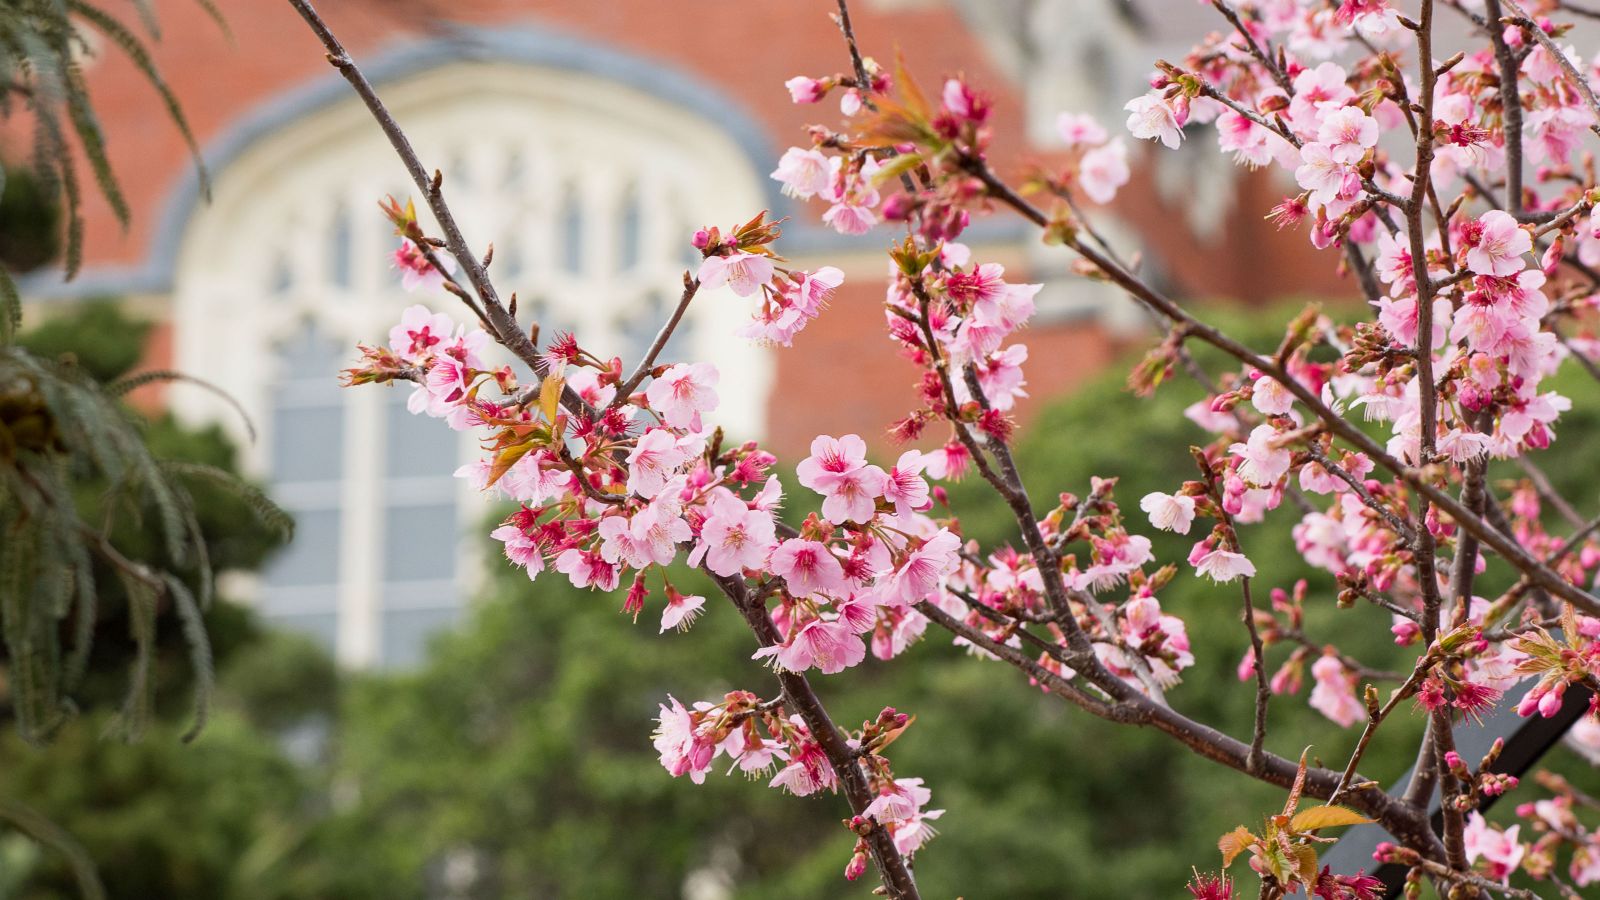 A close up picture of pink flowers on a tree outside of the Hunter building.